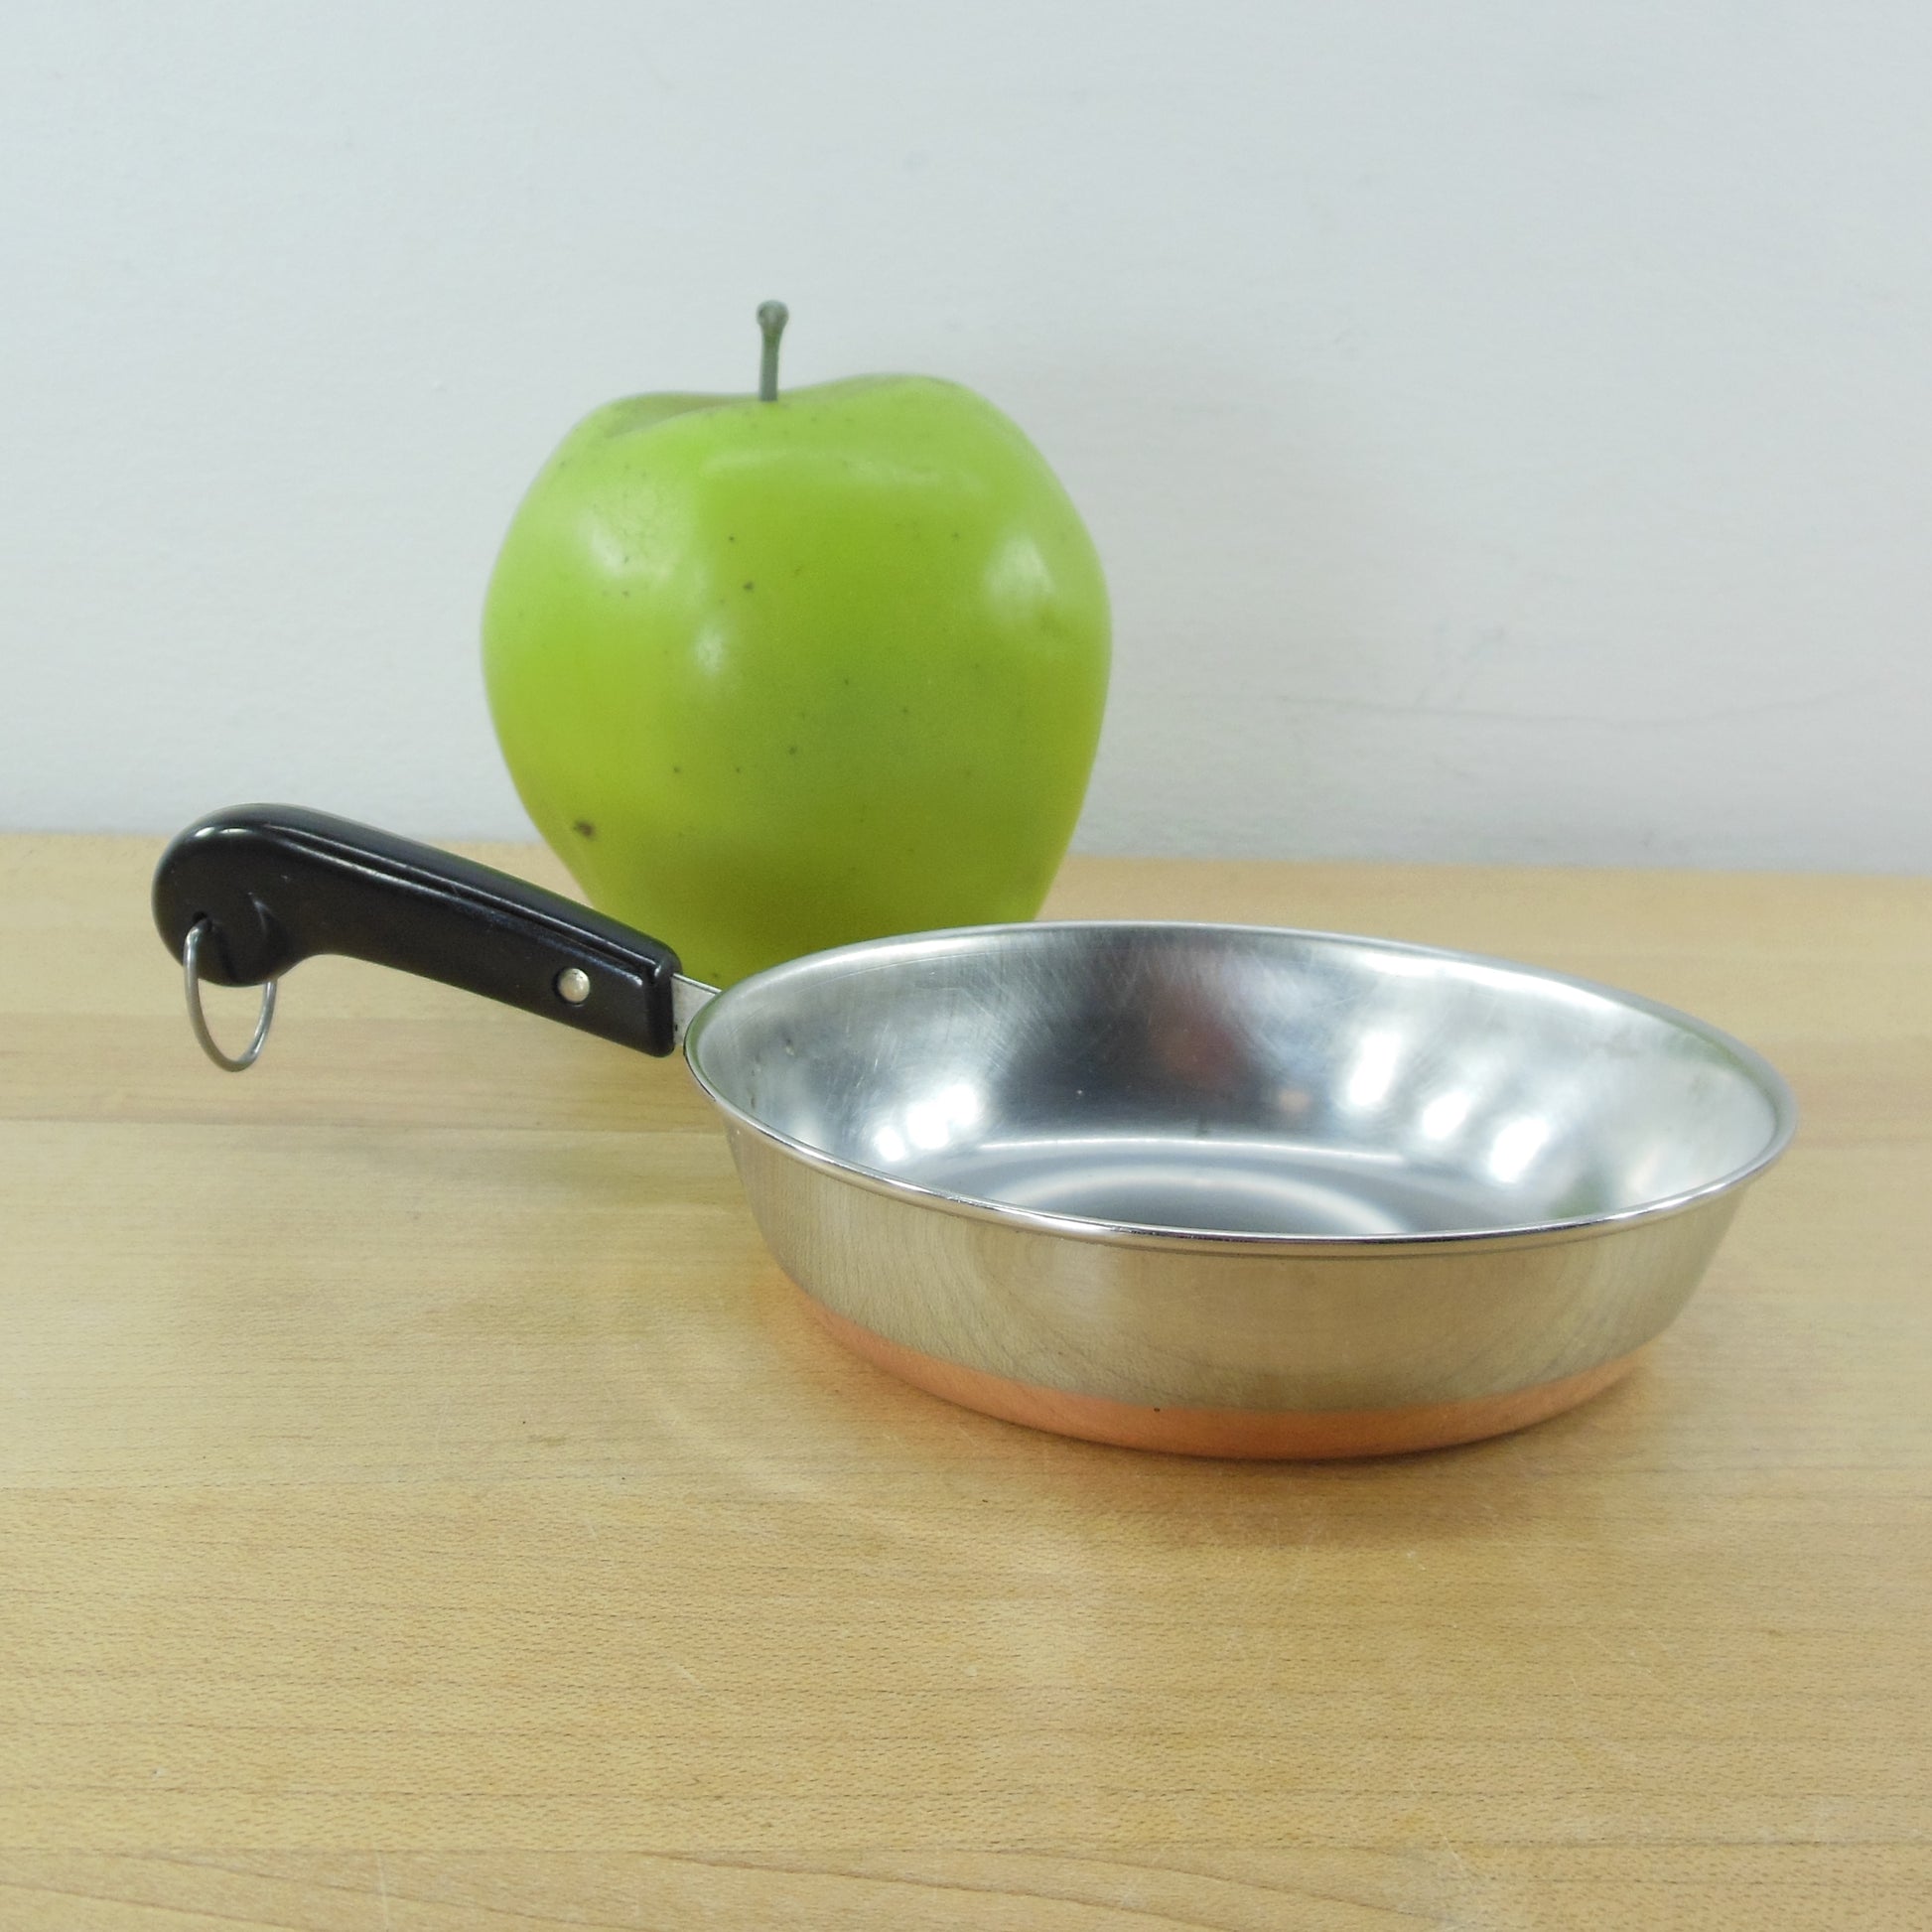 Revere Ware Stainless Copper Clad Toy Skillet Fry Pan